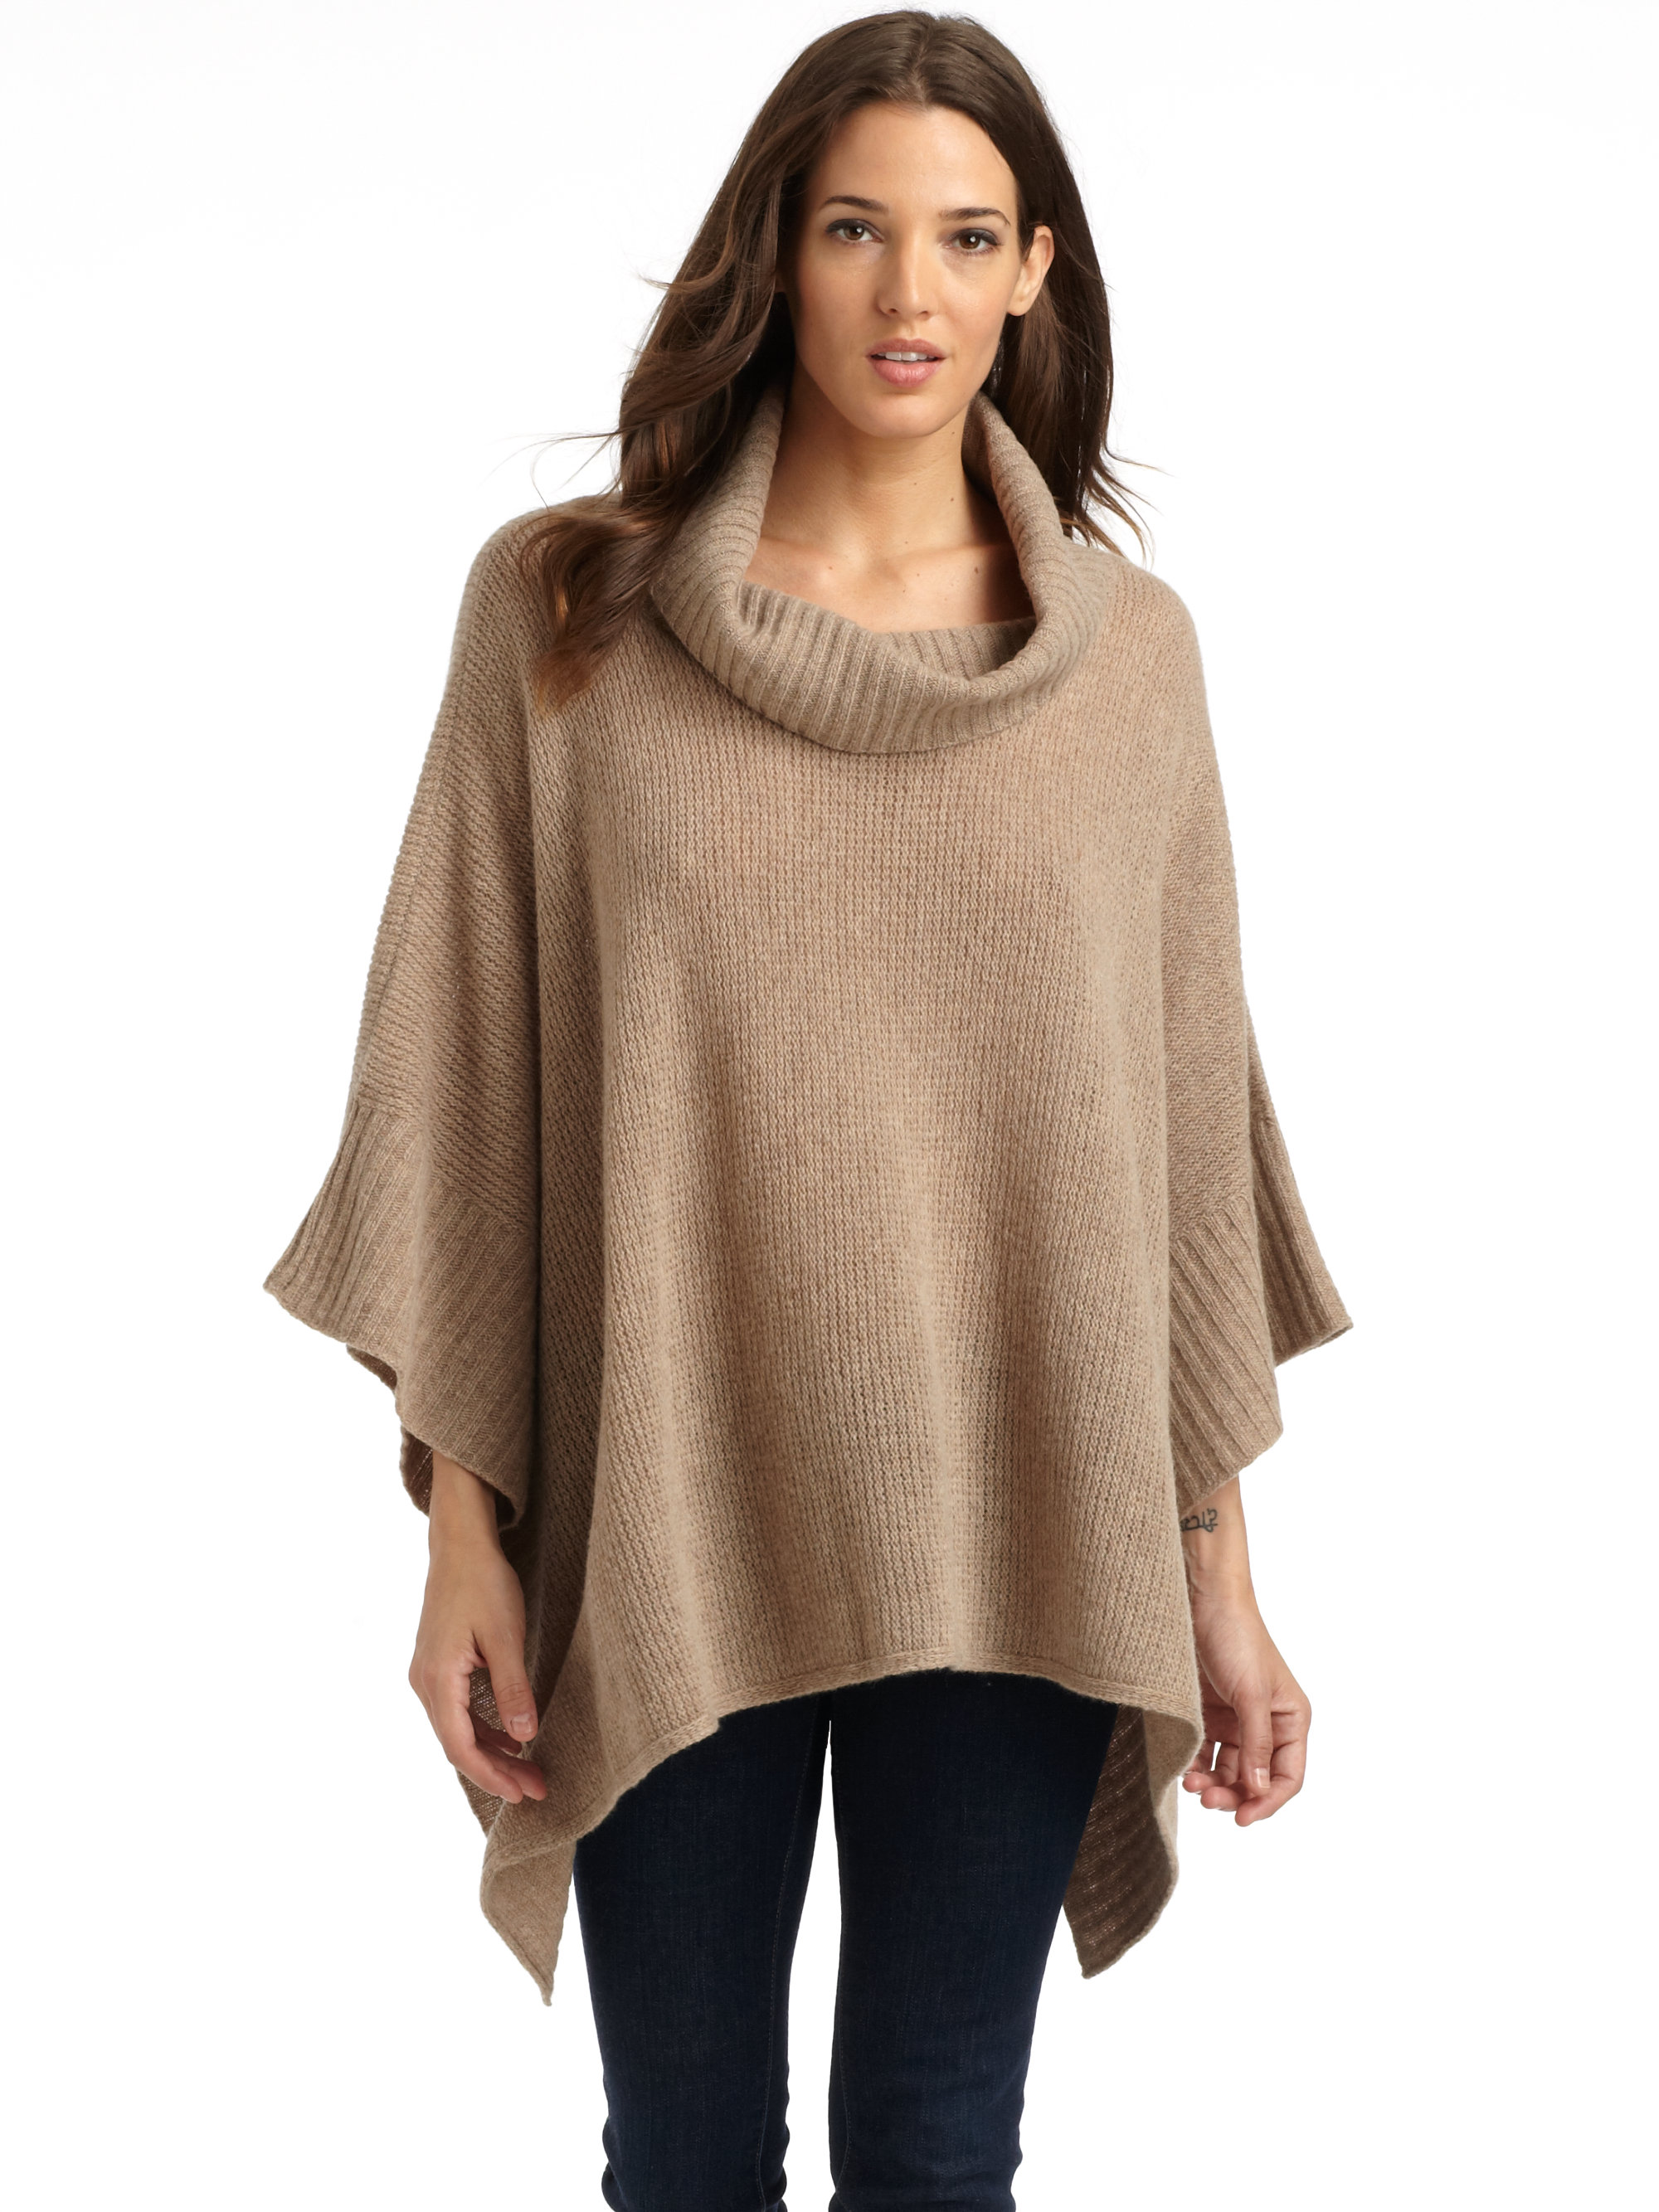 How to wear a poncho sweater?